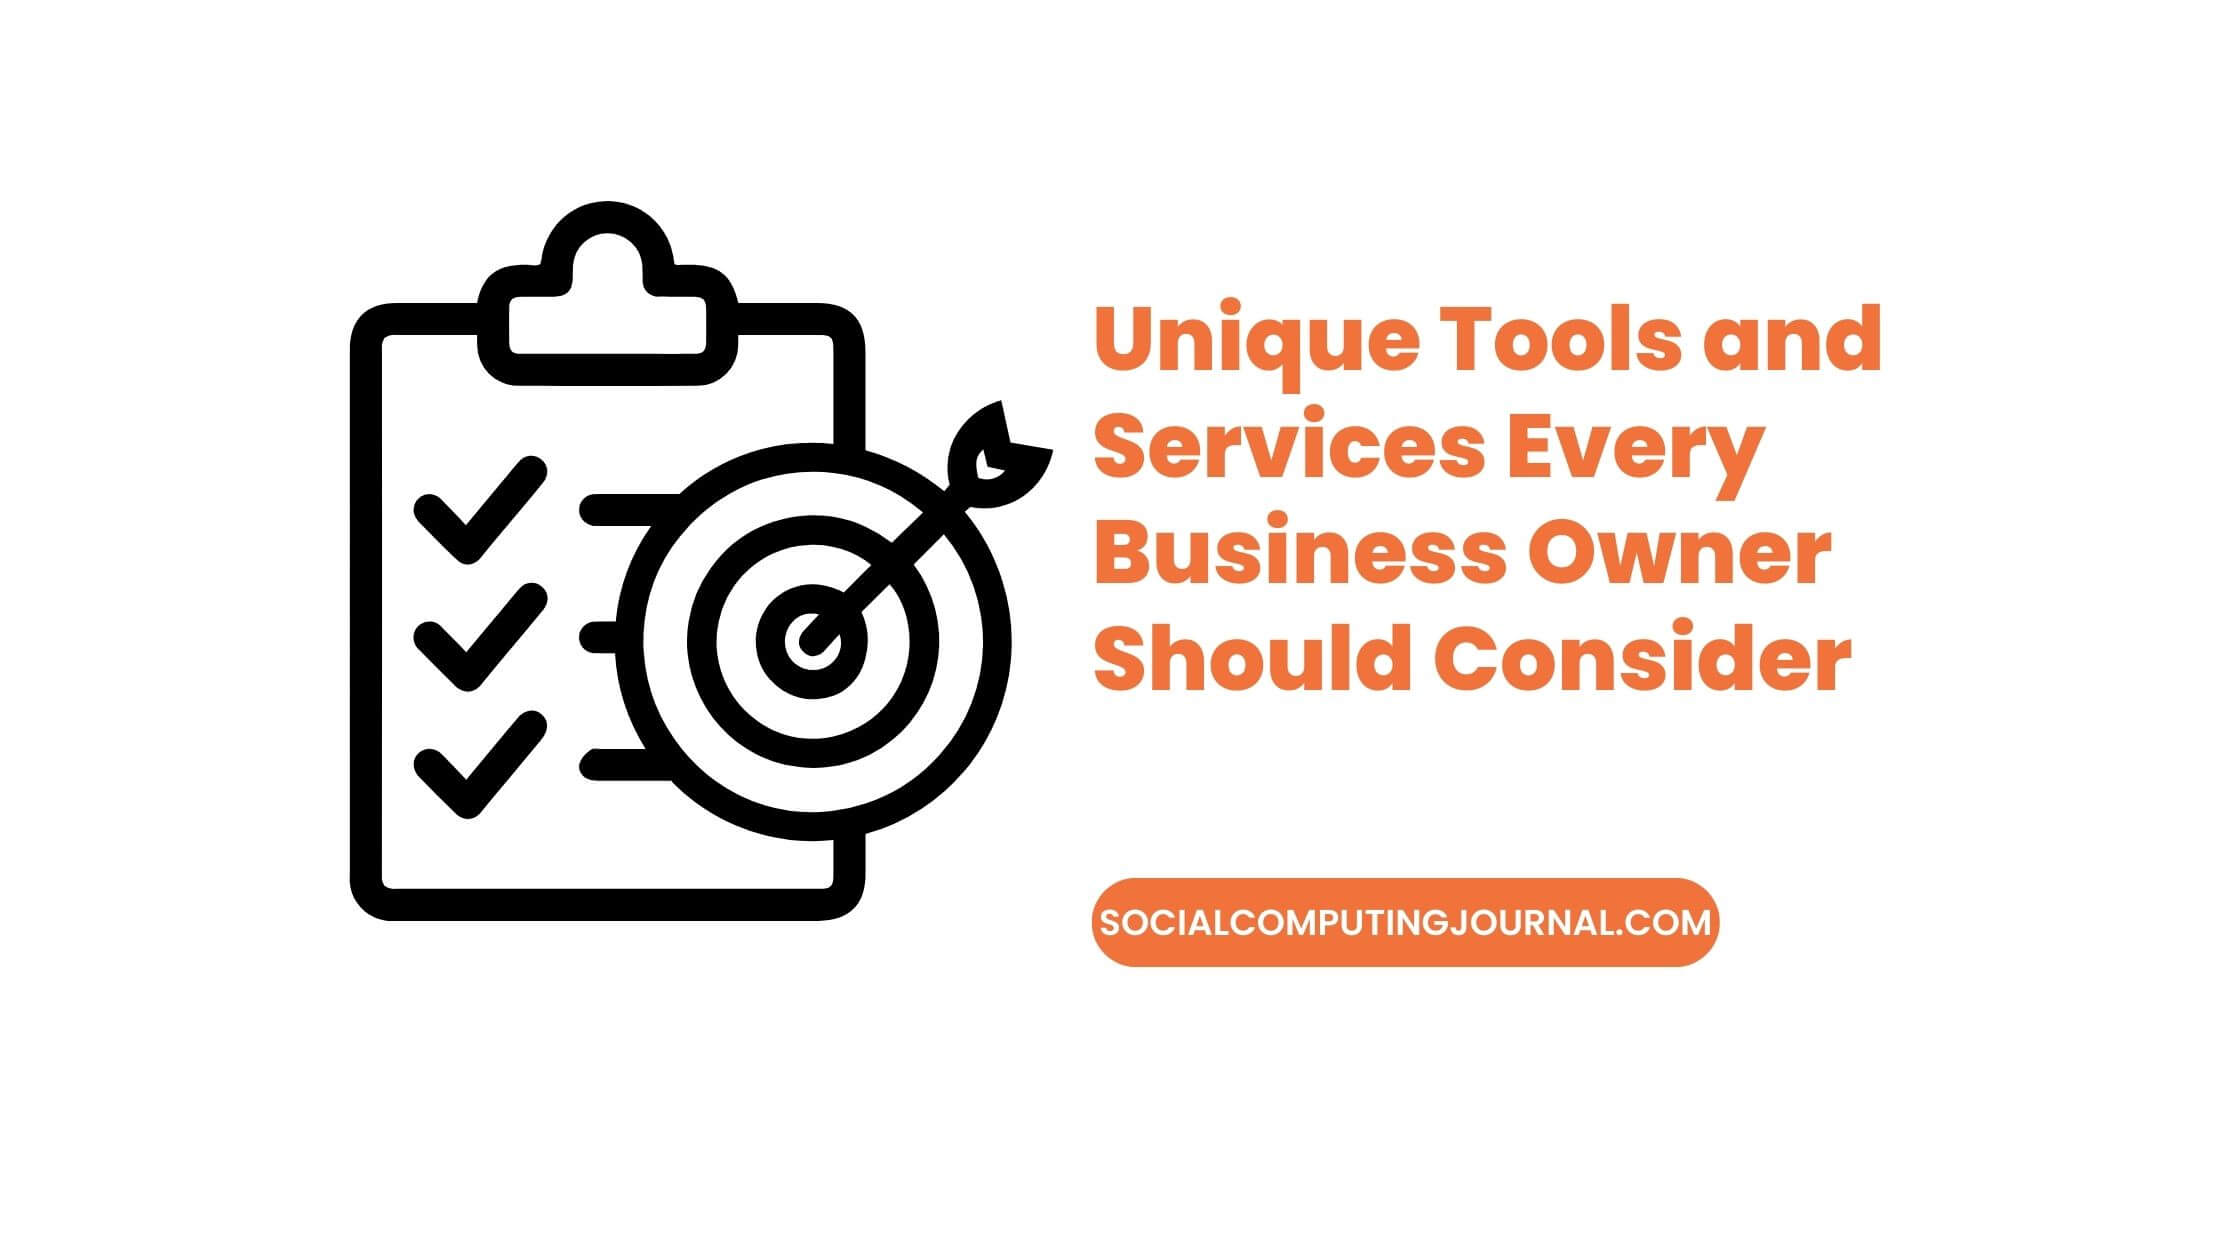 Unique Tools and Services Every Business Owner Should Consider